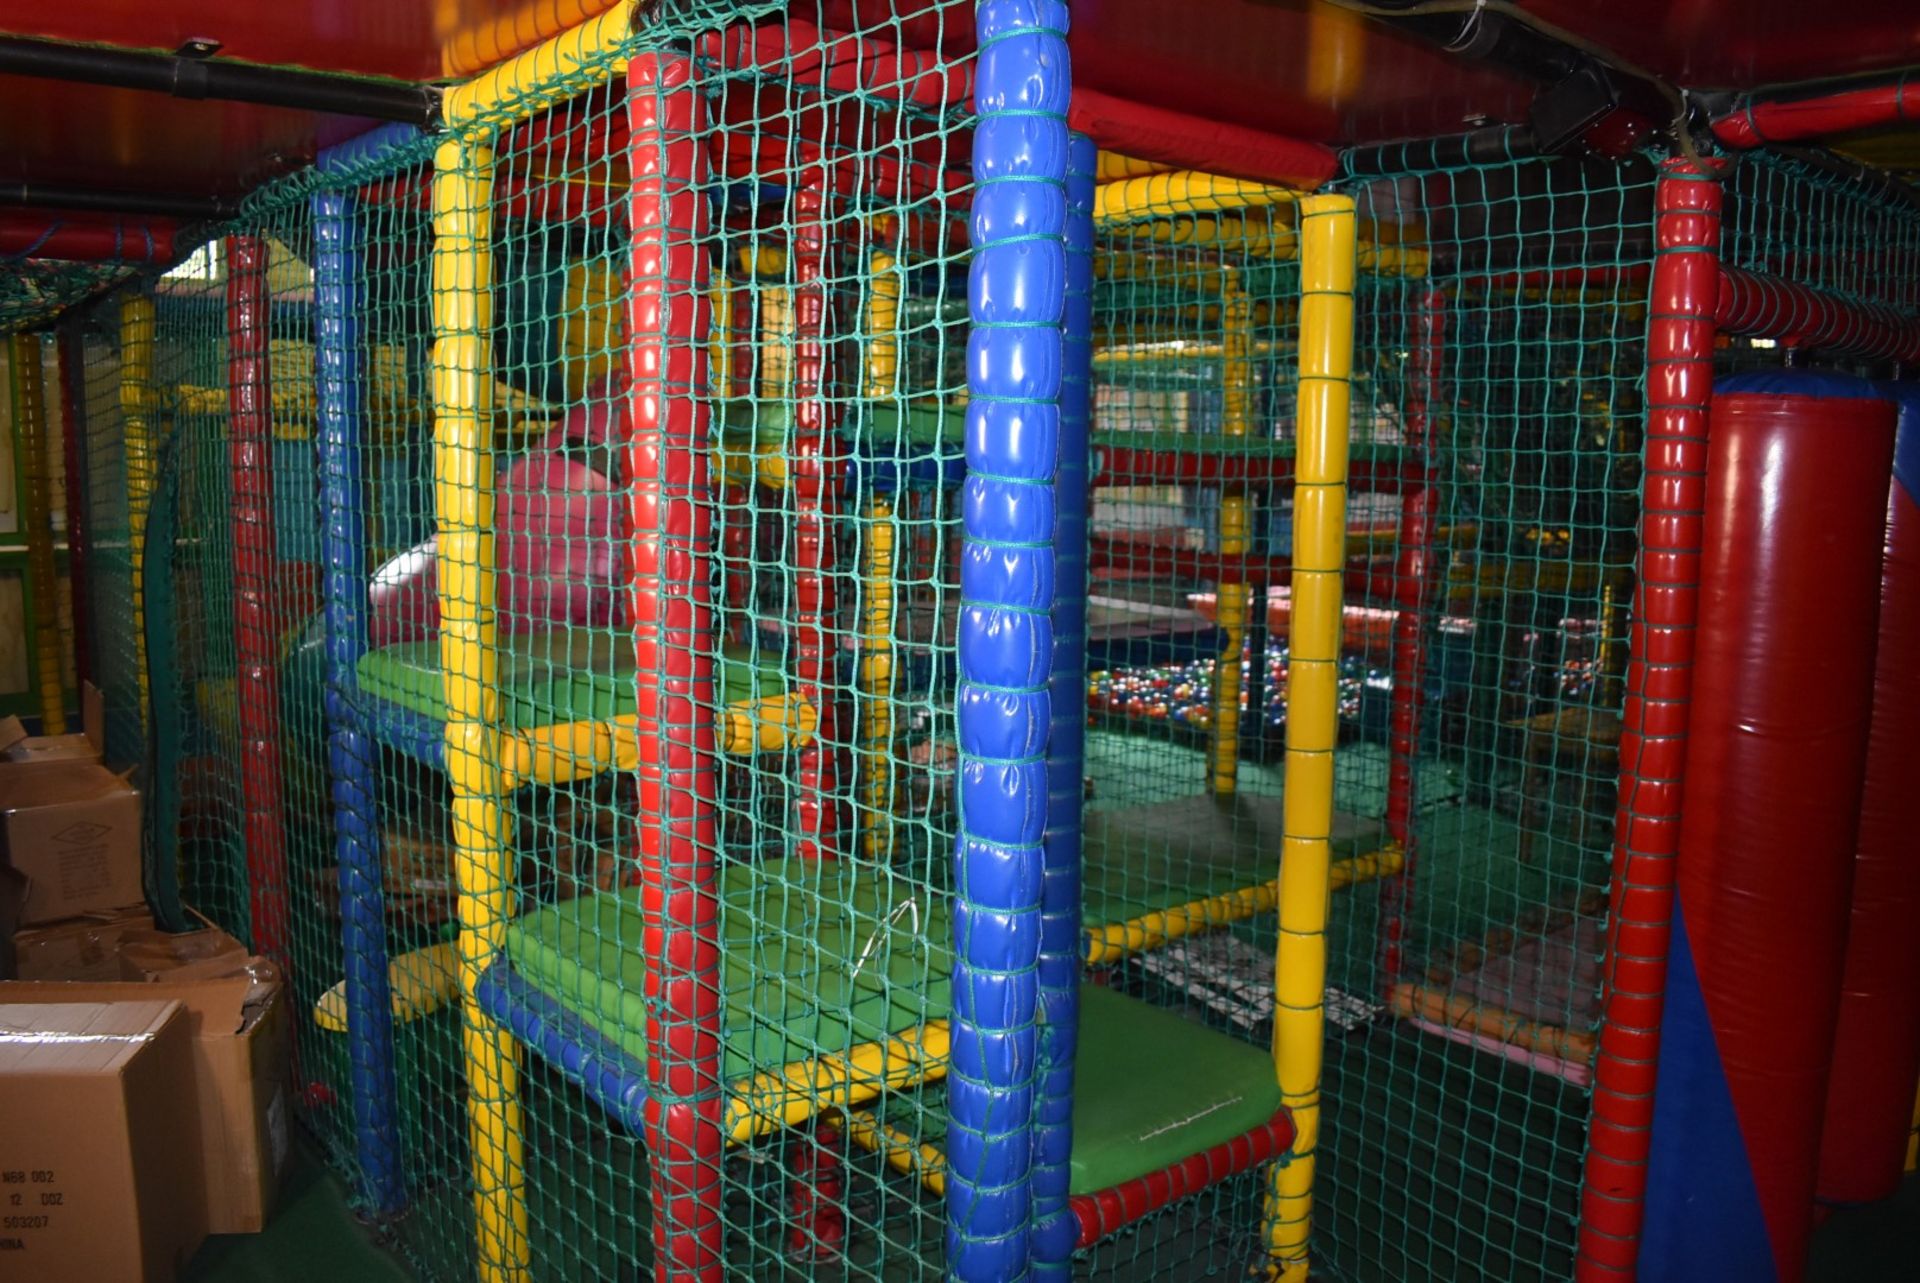 Bramleys Big Adventure Playground - Giant Action-Packed Playcentre With Slides, Zip Line Swings, - Image 16 of 128